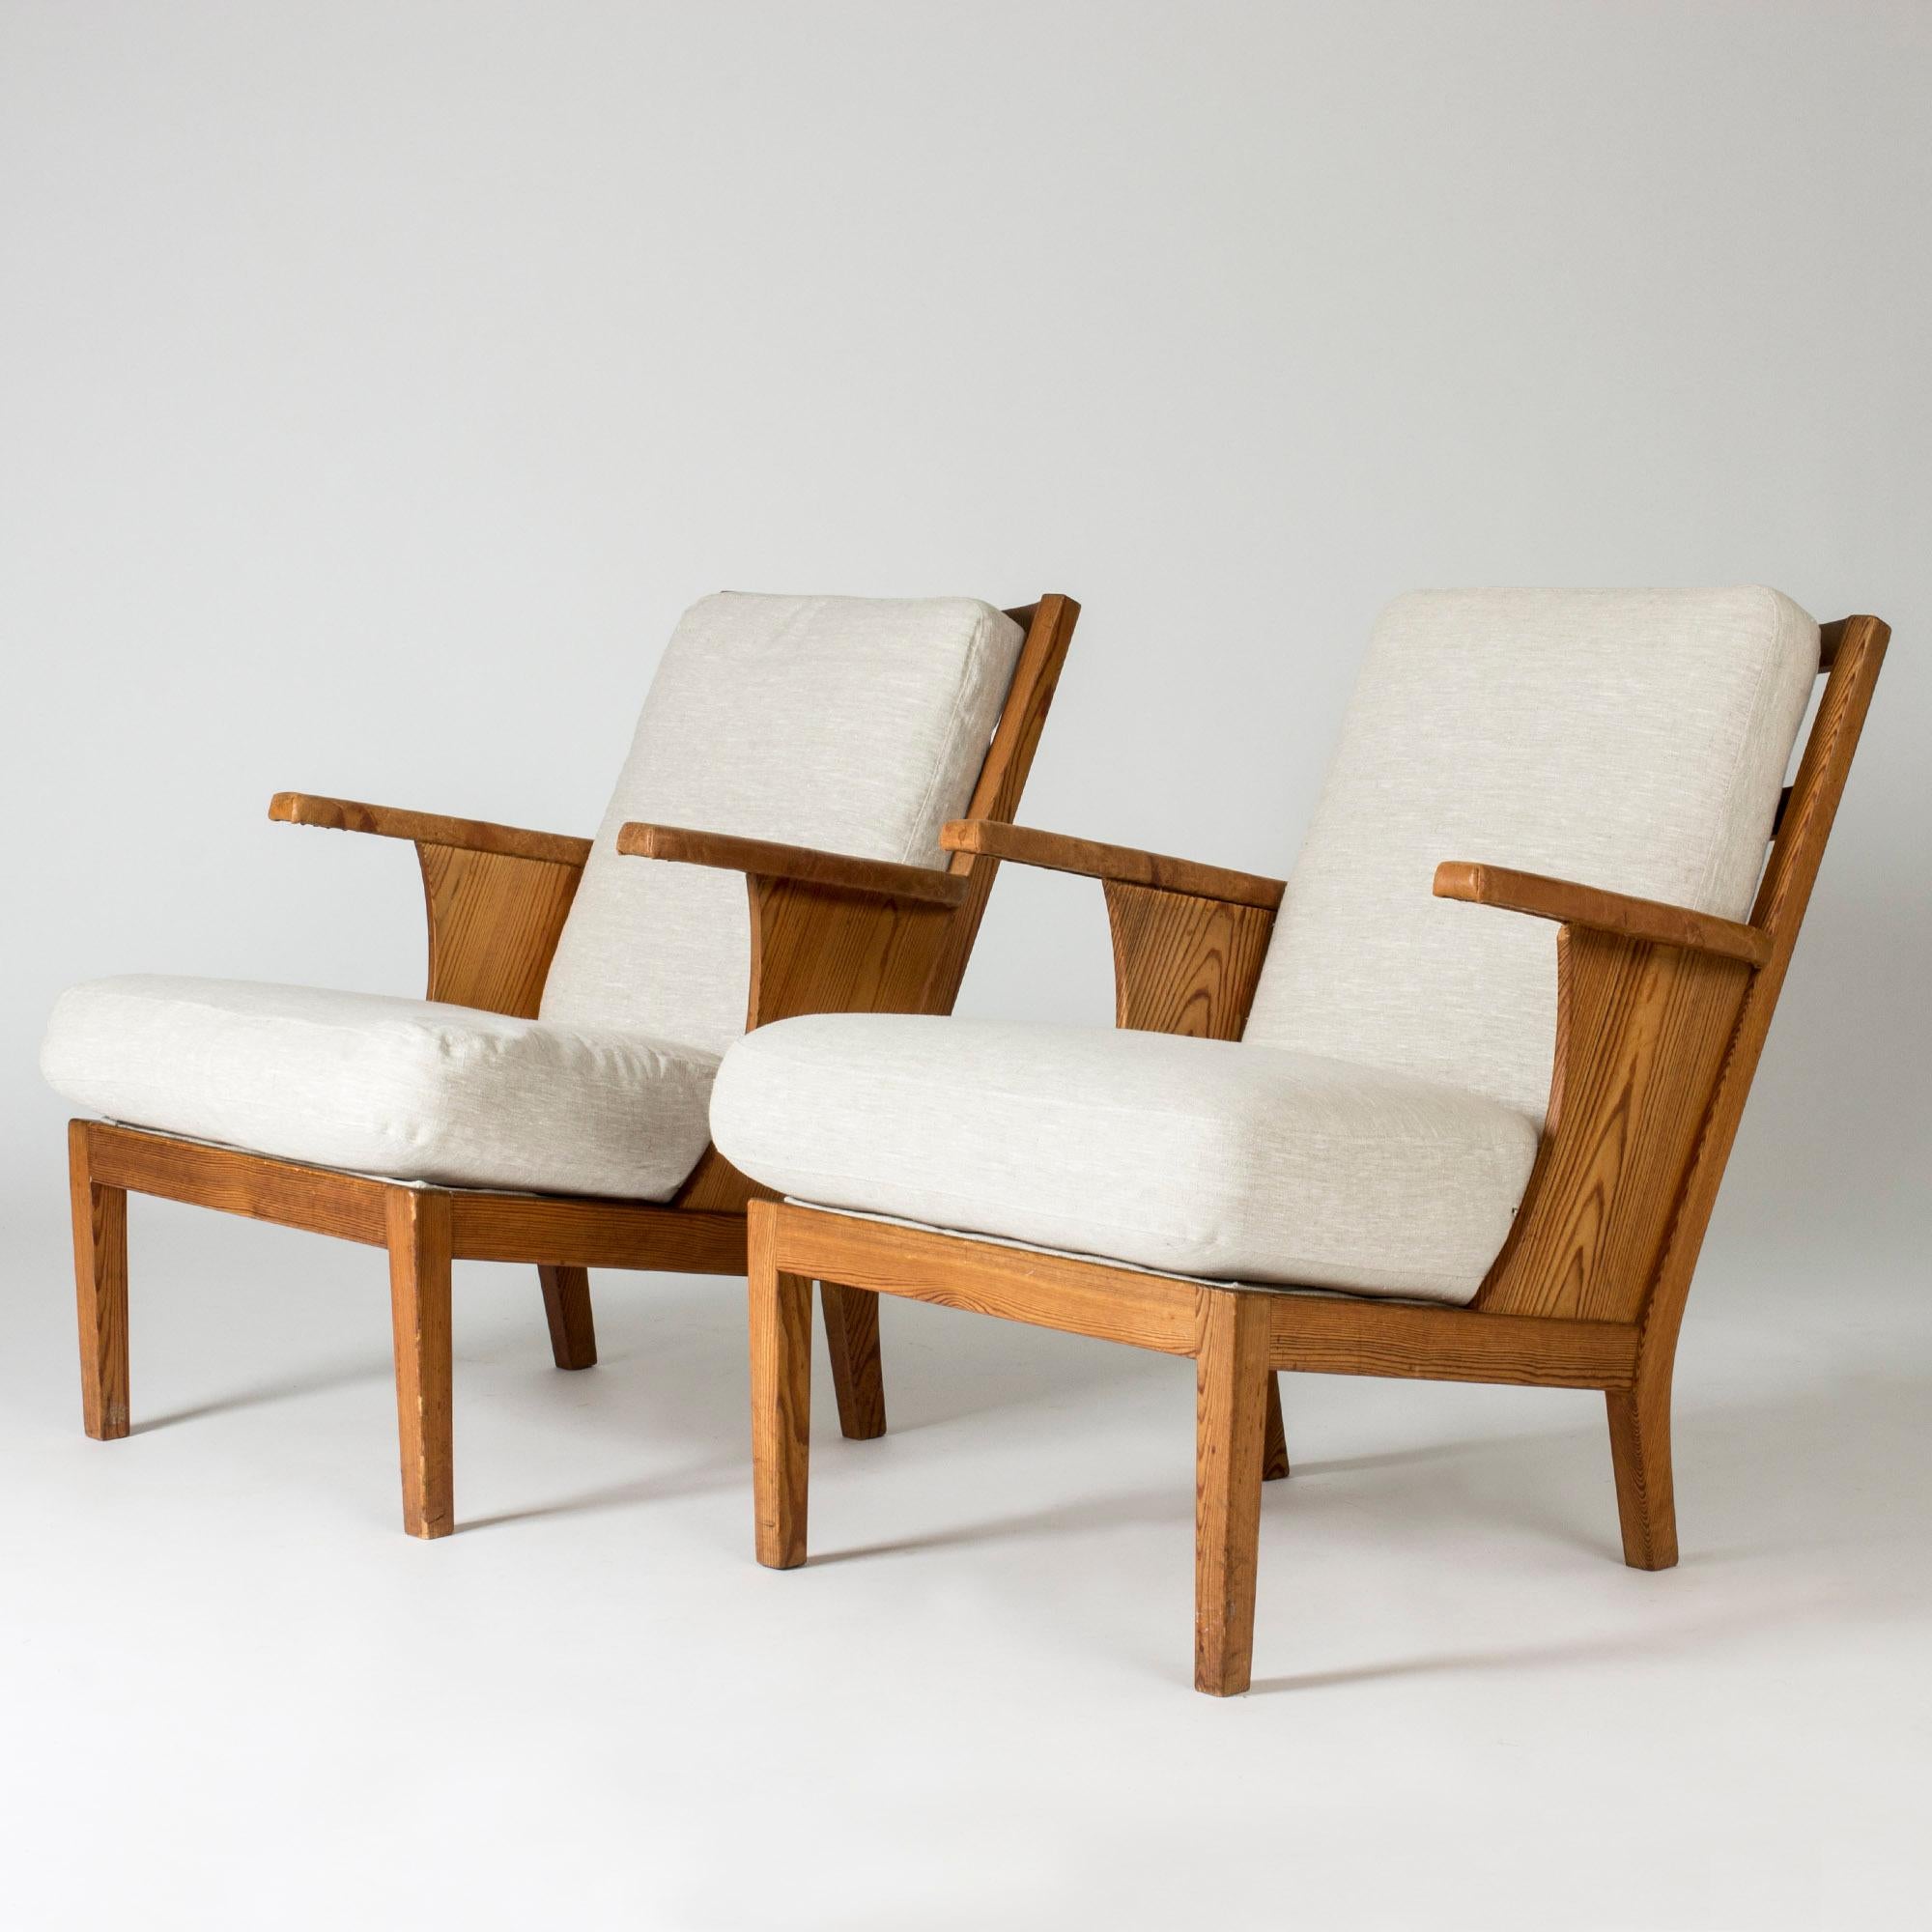 Pair of functionalist lounge chairs by Carl Malmsten, made from pine with leather armrests and linen upholstery. Beautiful woodgrain, timeless design.